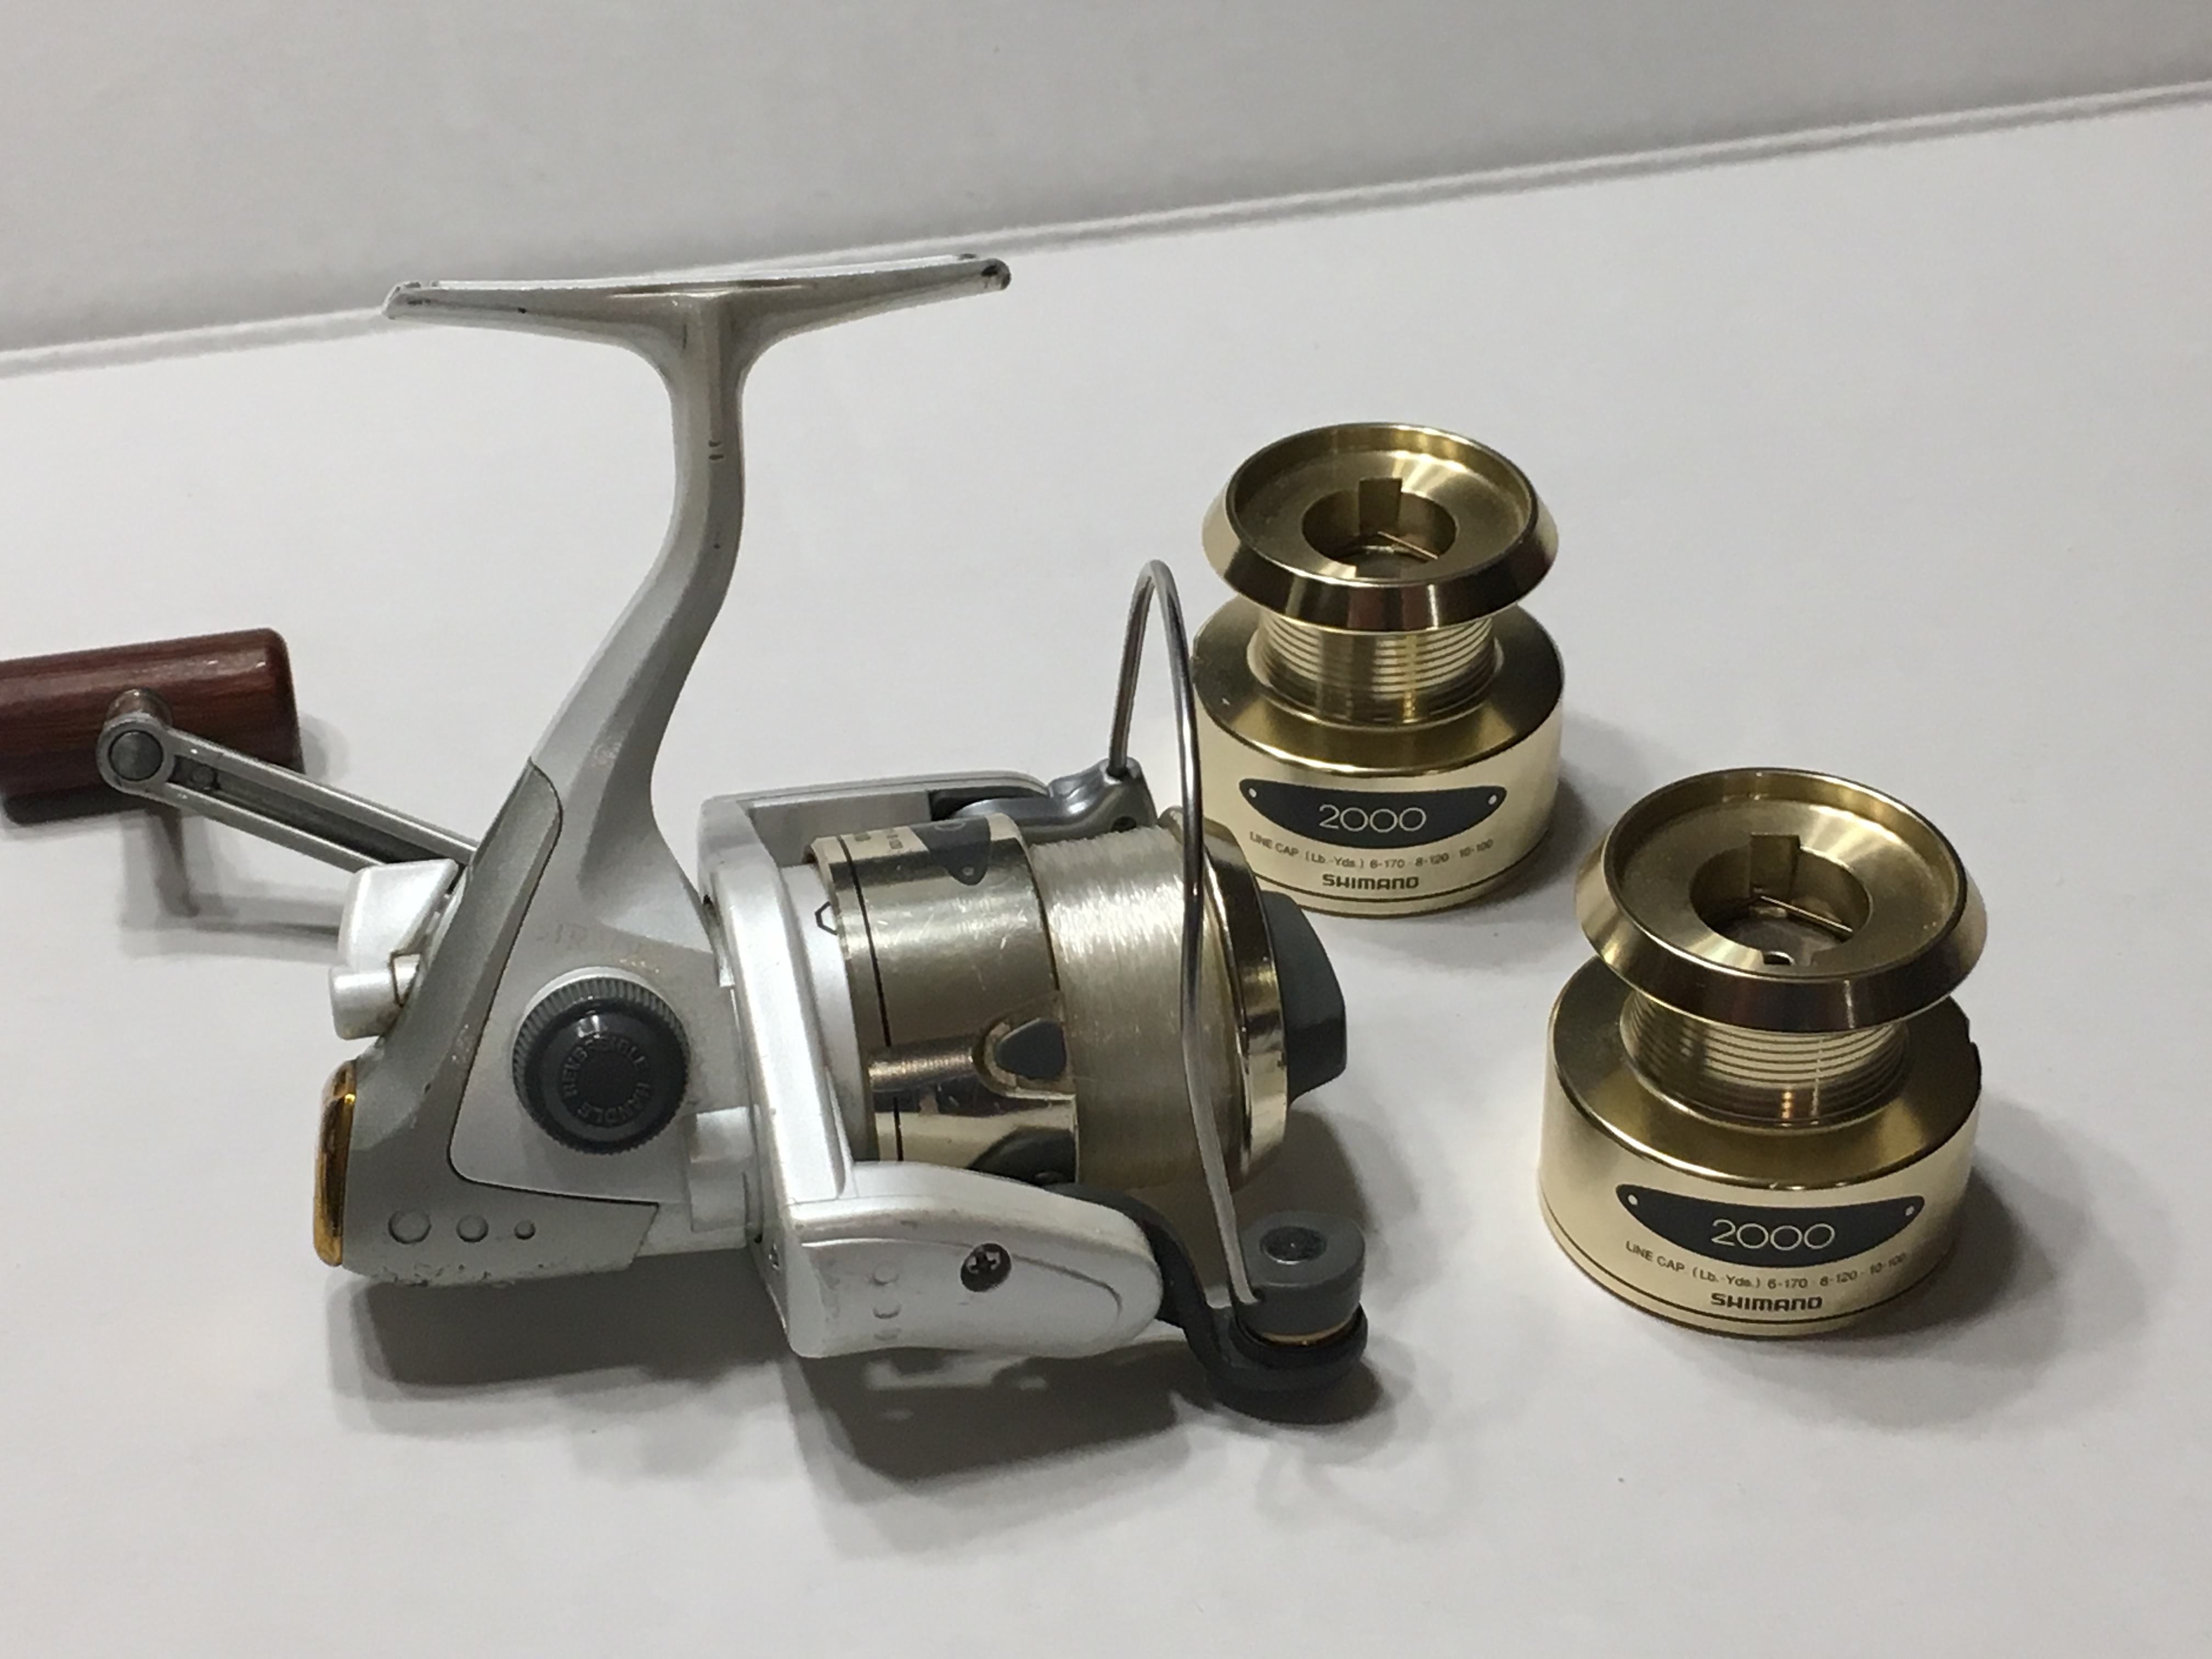 Shimano 2000 Stradic spinning reel - Classified Ads - Classified Ads